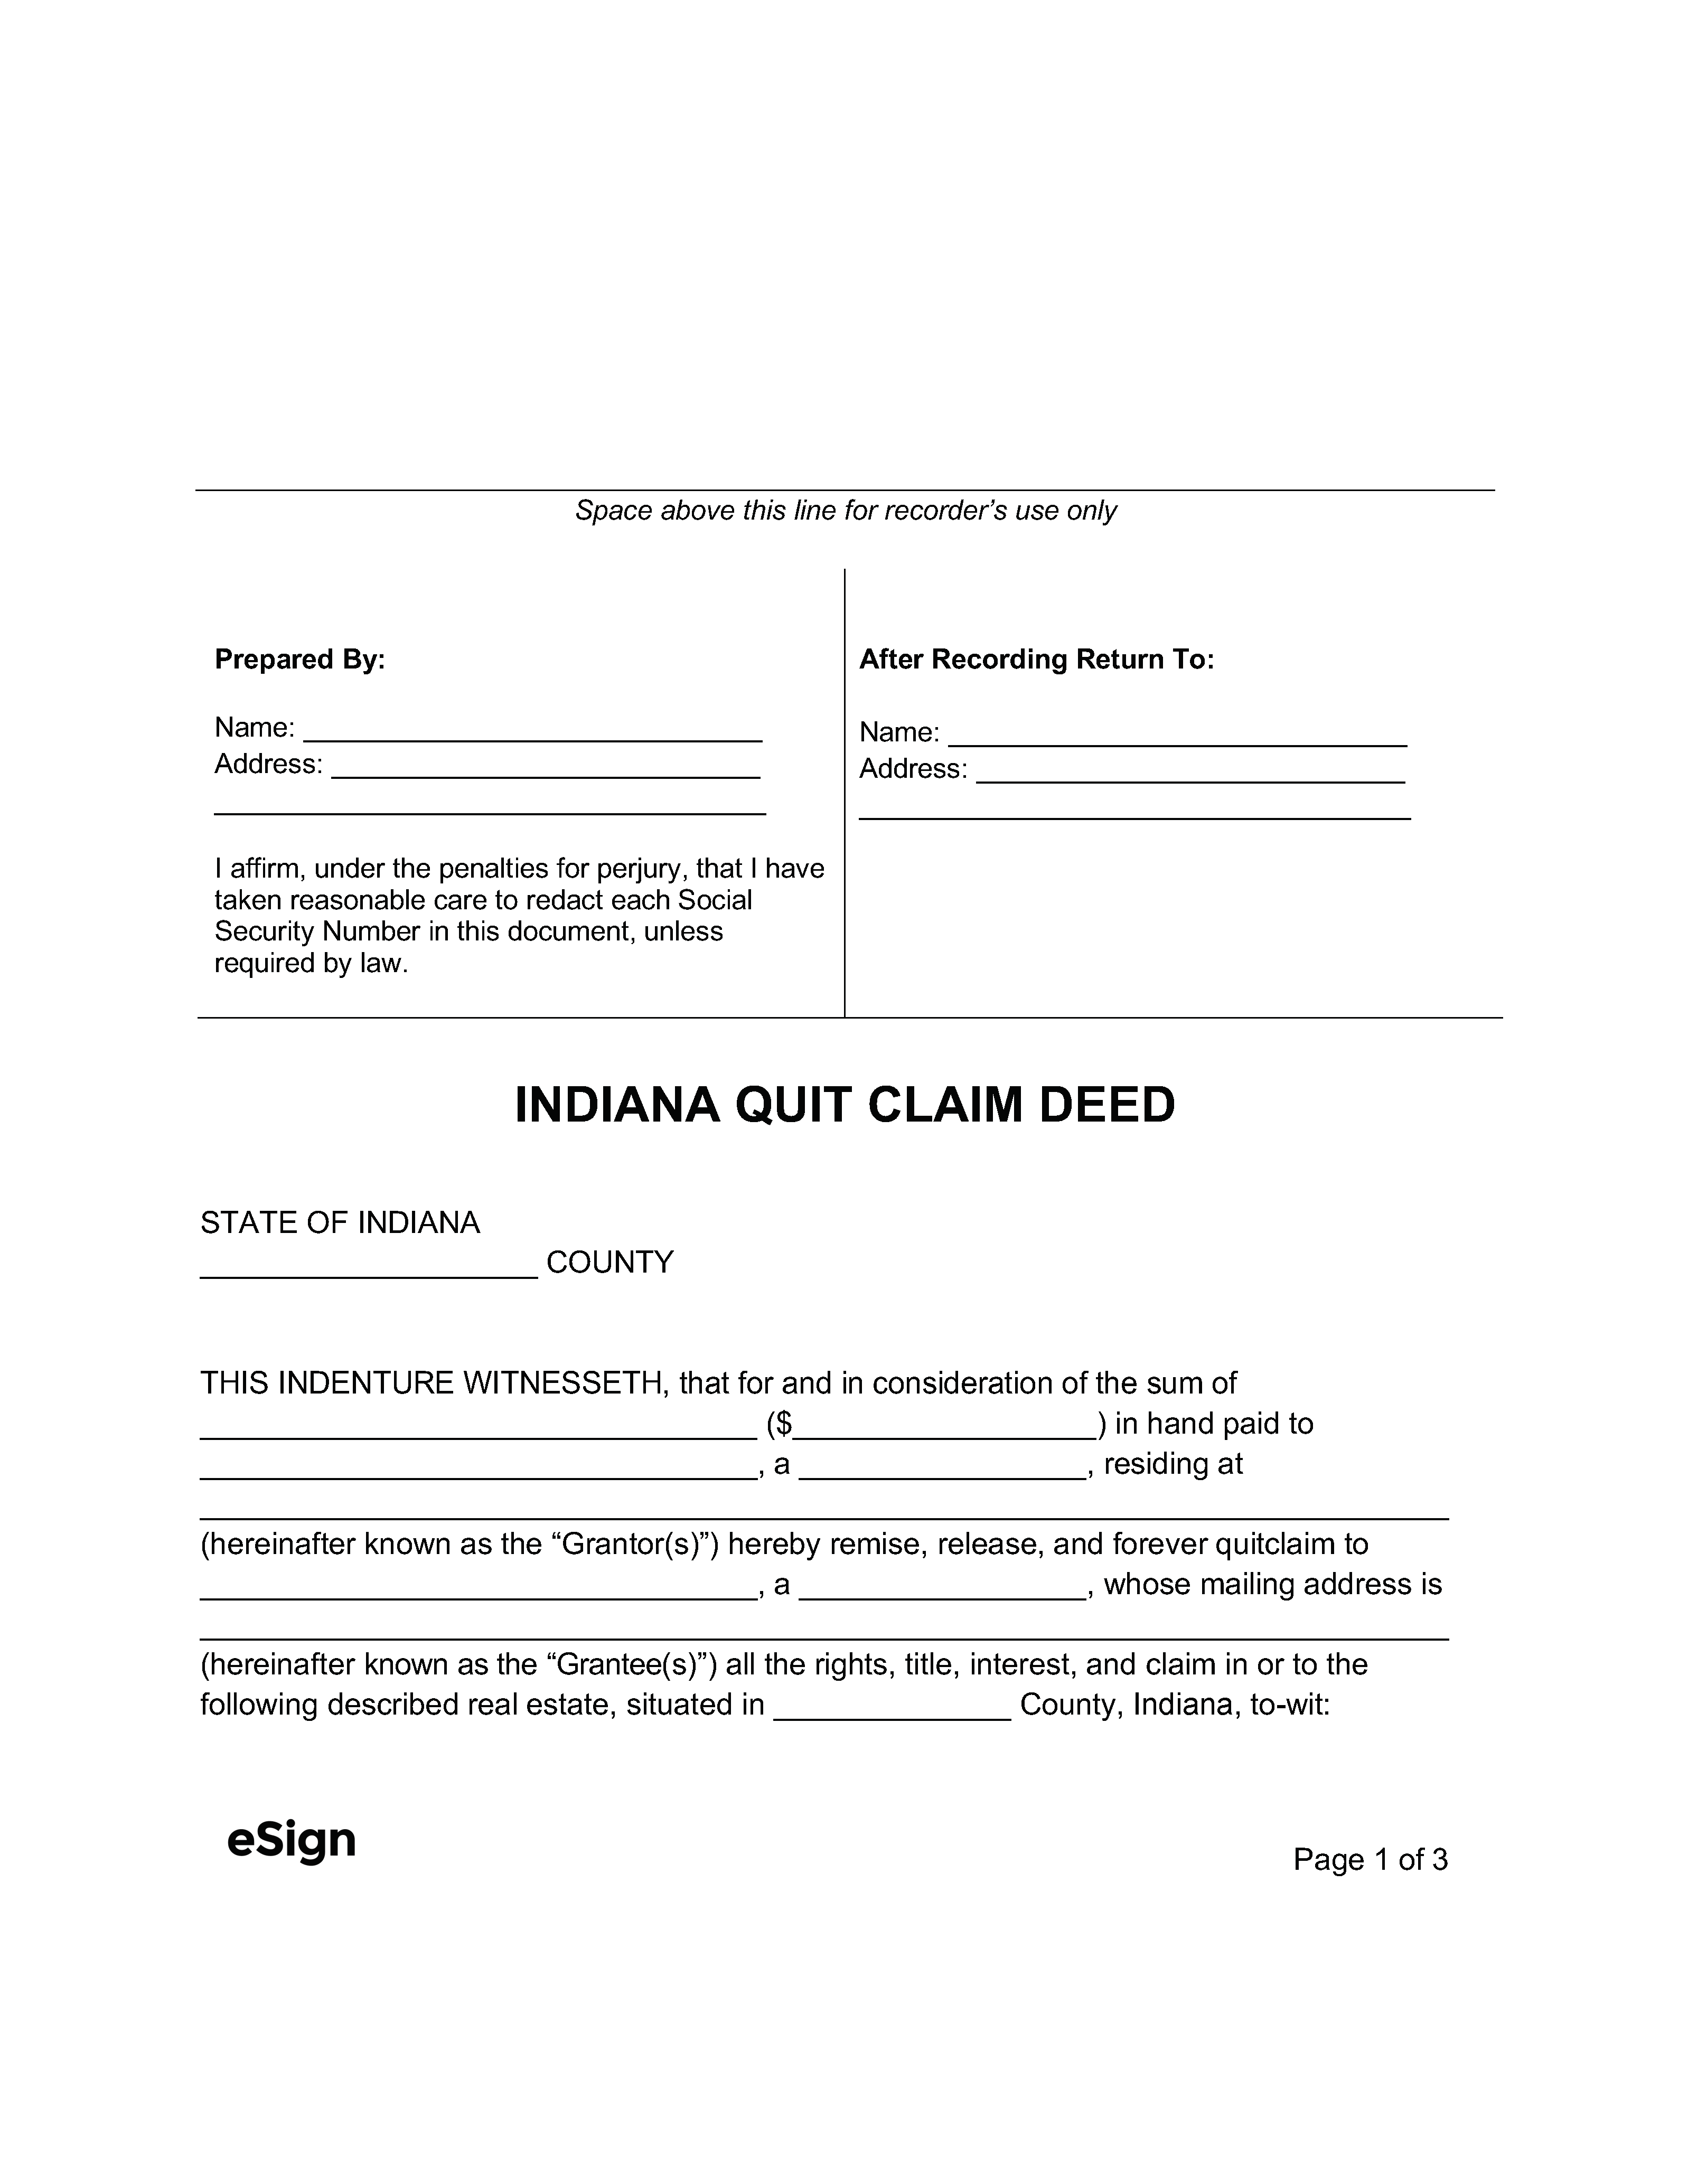 free-indiana-quit-claim-deed-form-pdf-word